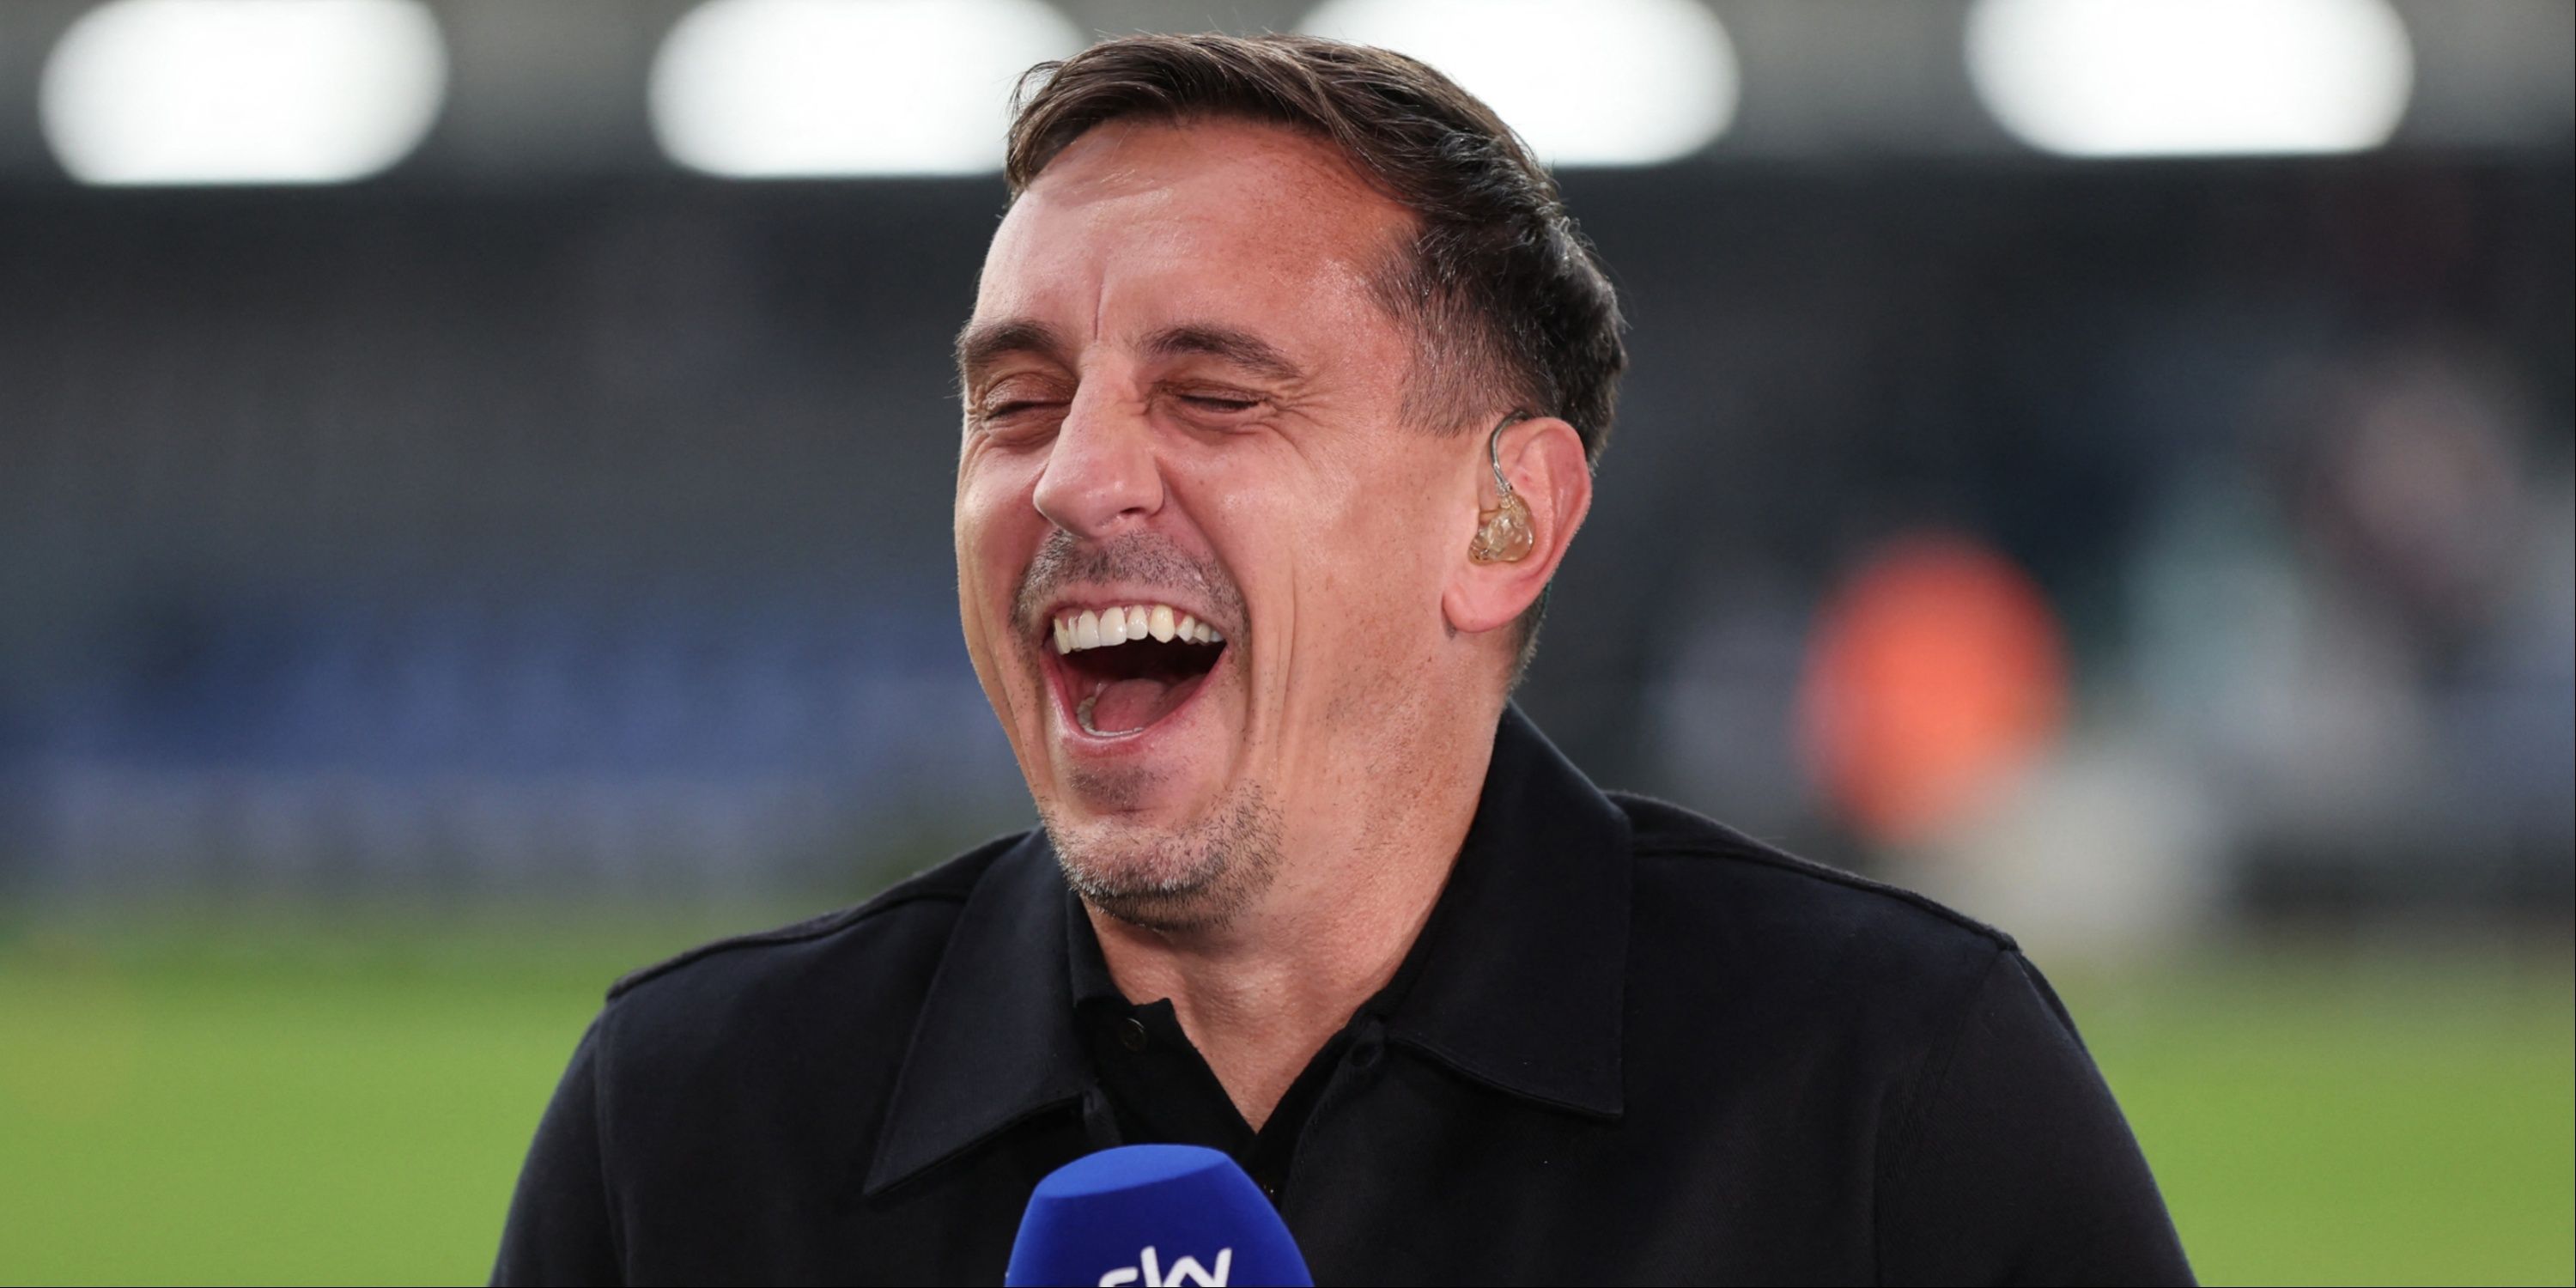 Gary Neville as a pundit for Sky Sports